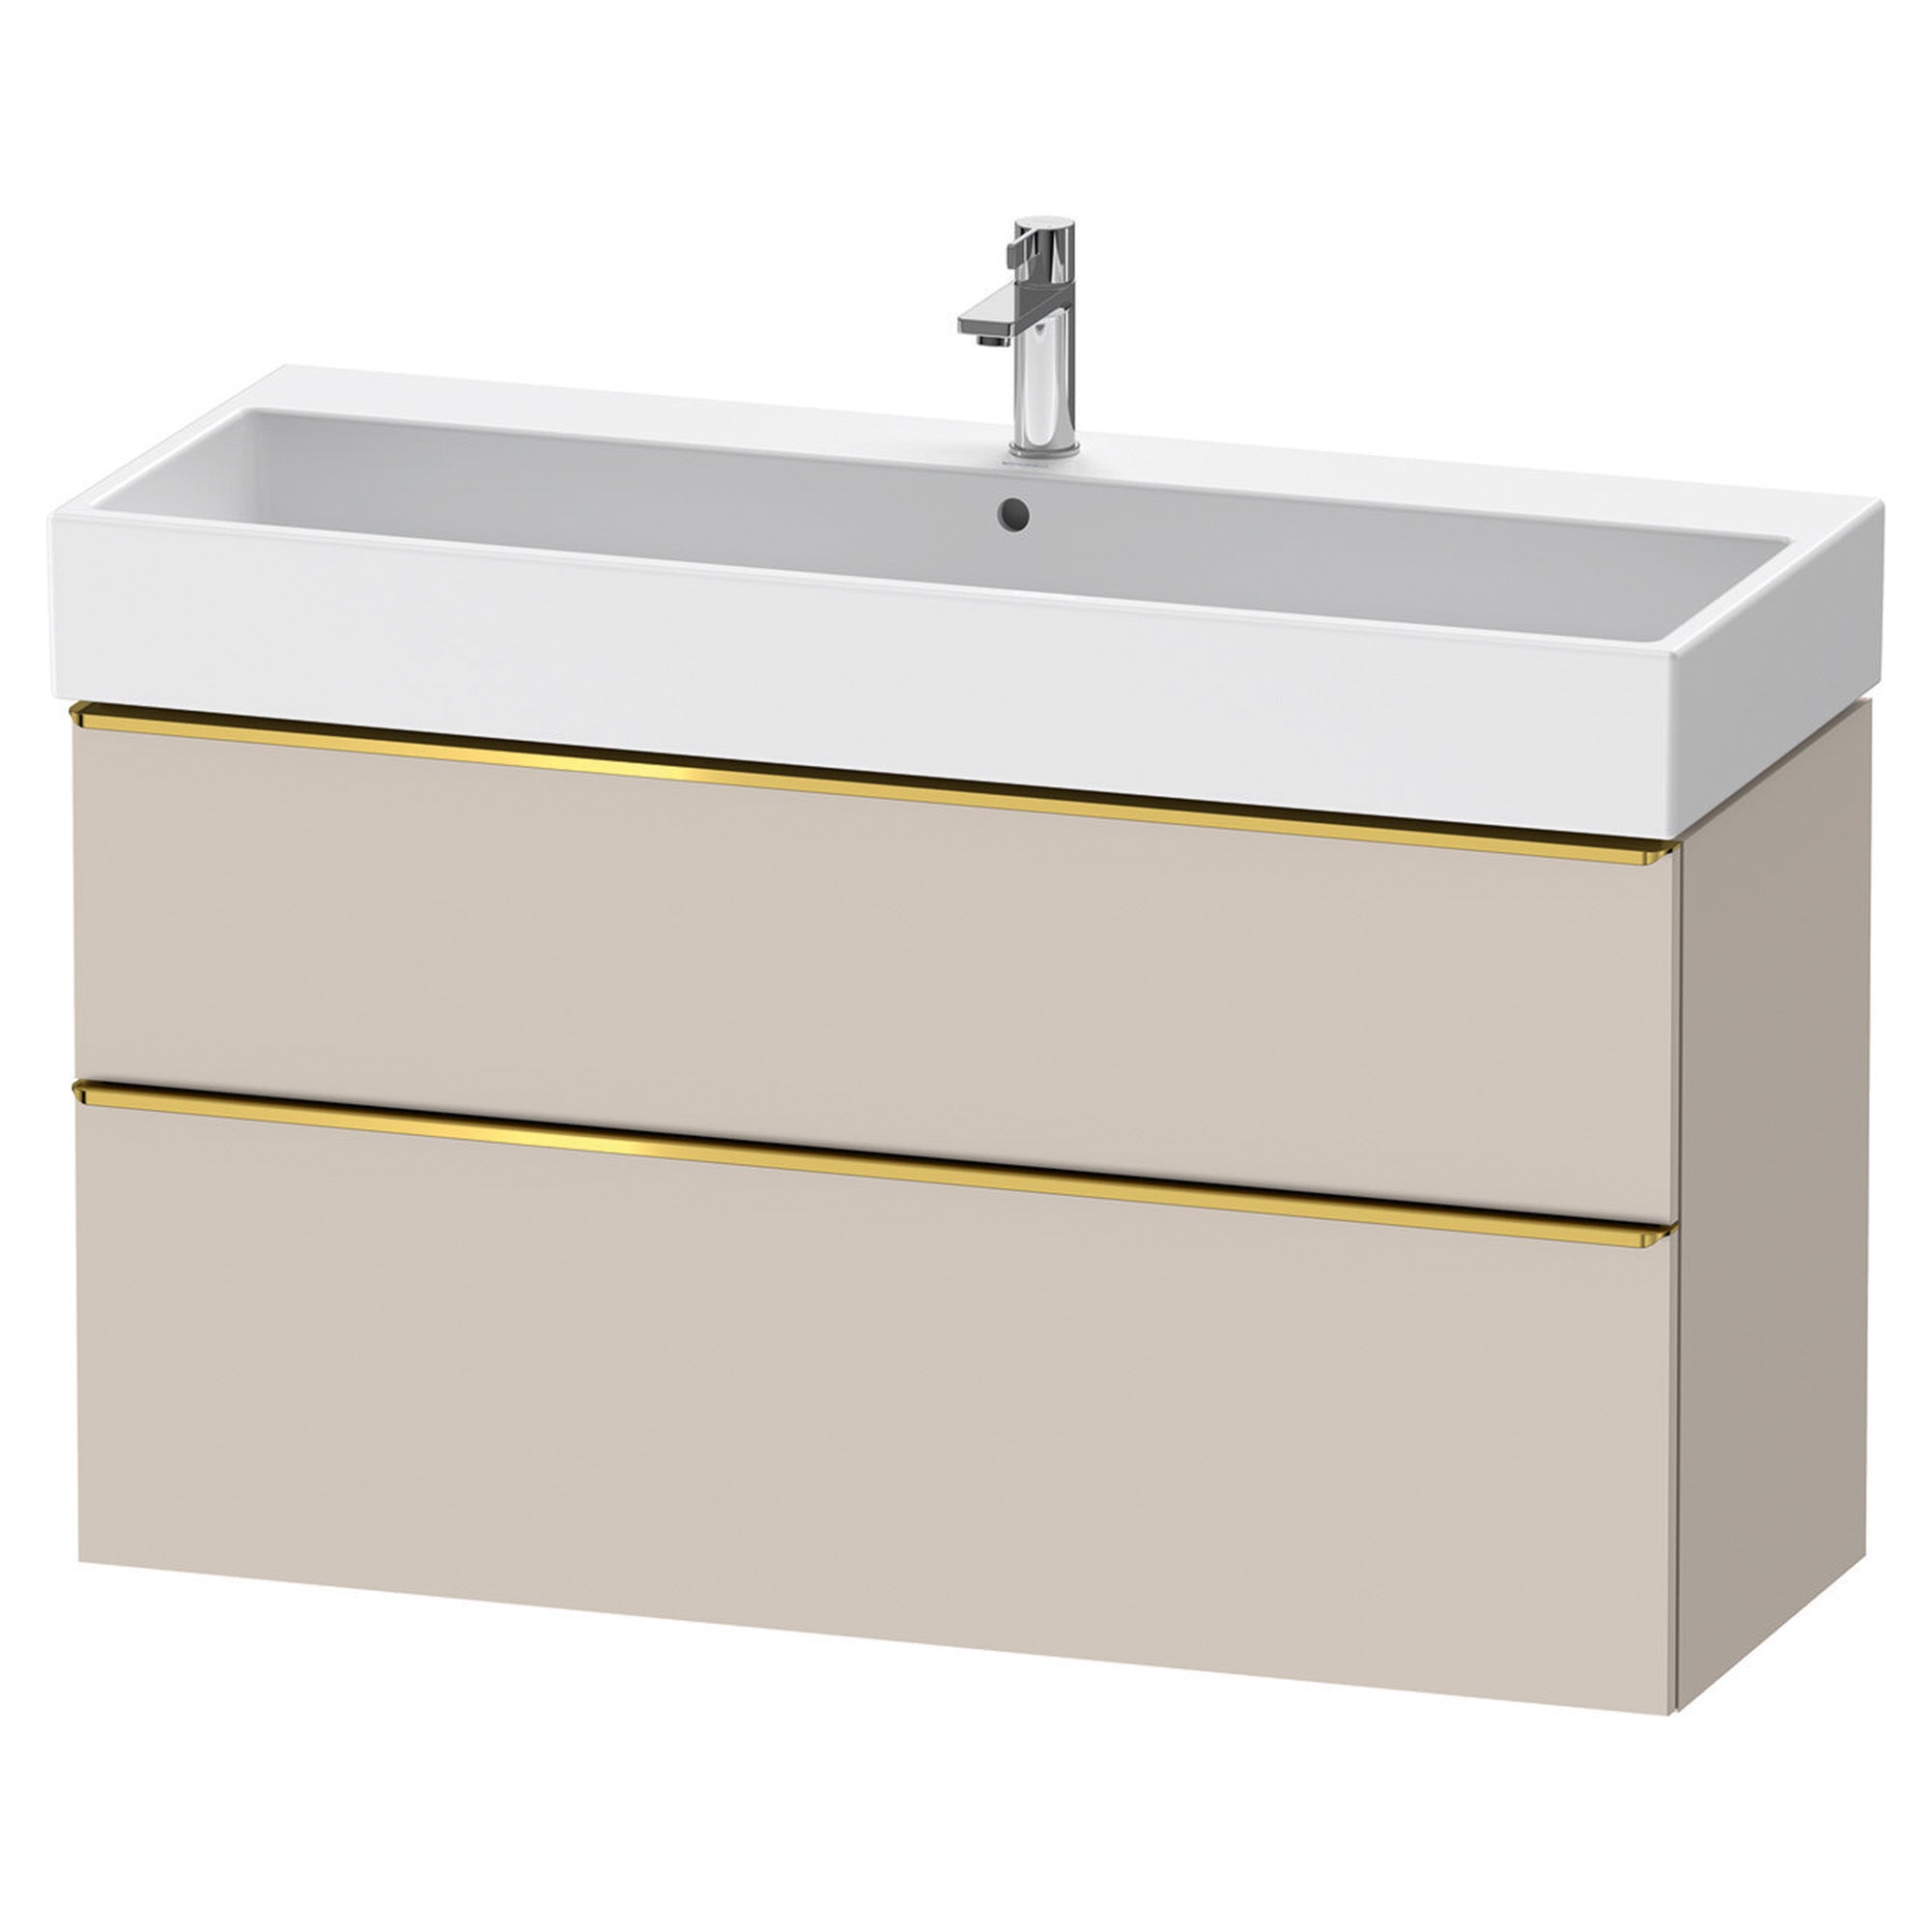 duravit d-neo 1200 wall mounted vanity unit with vero basin taupe gold handles